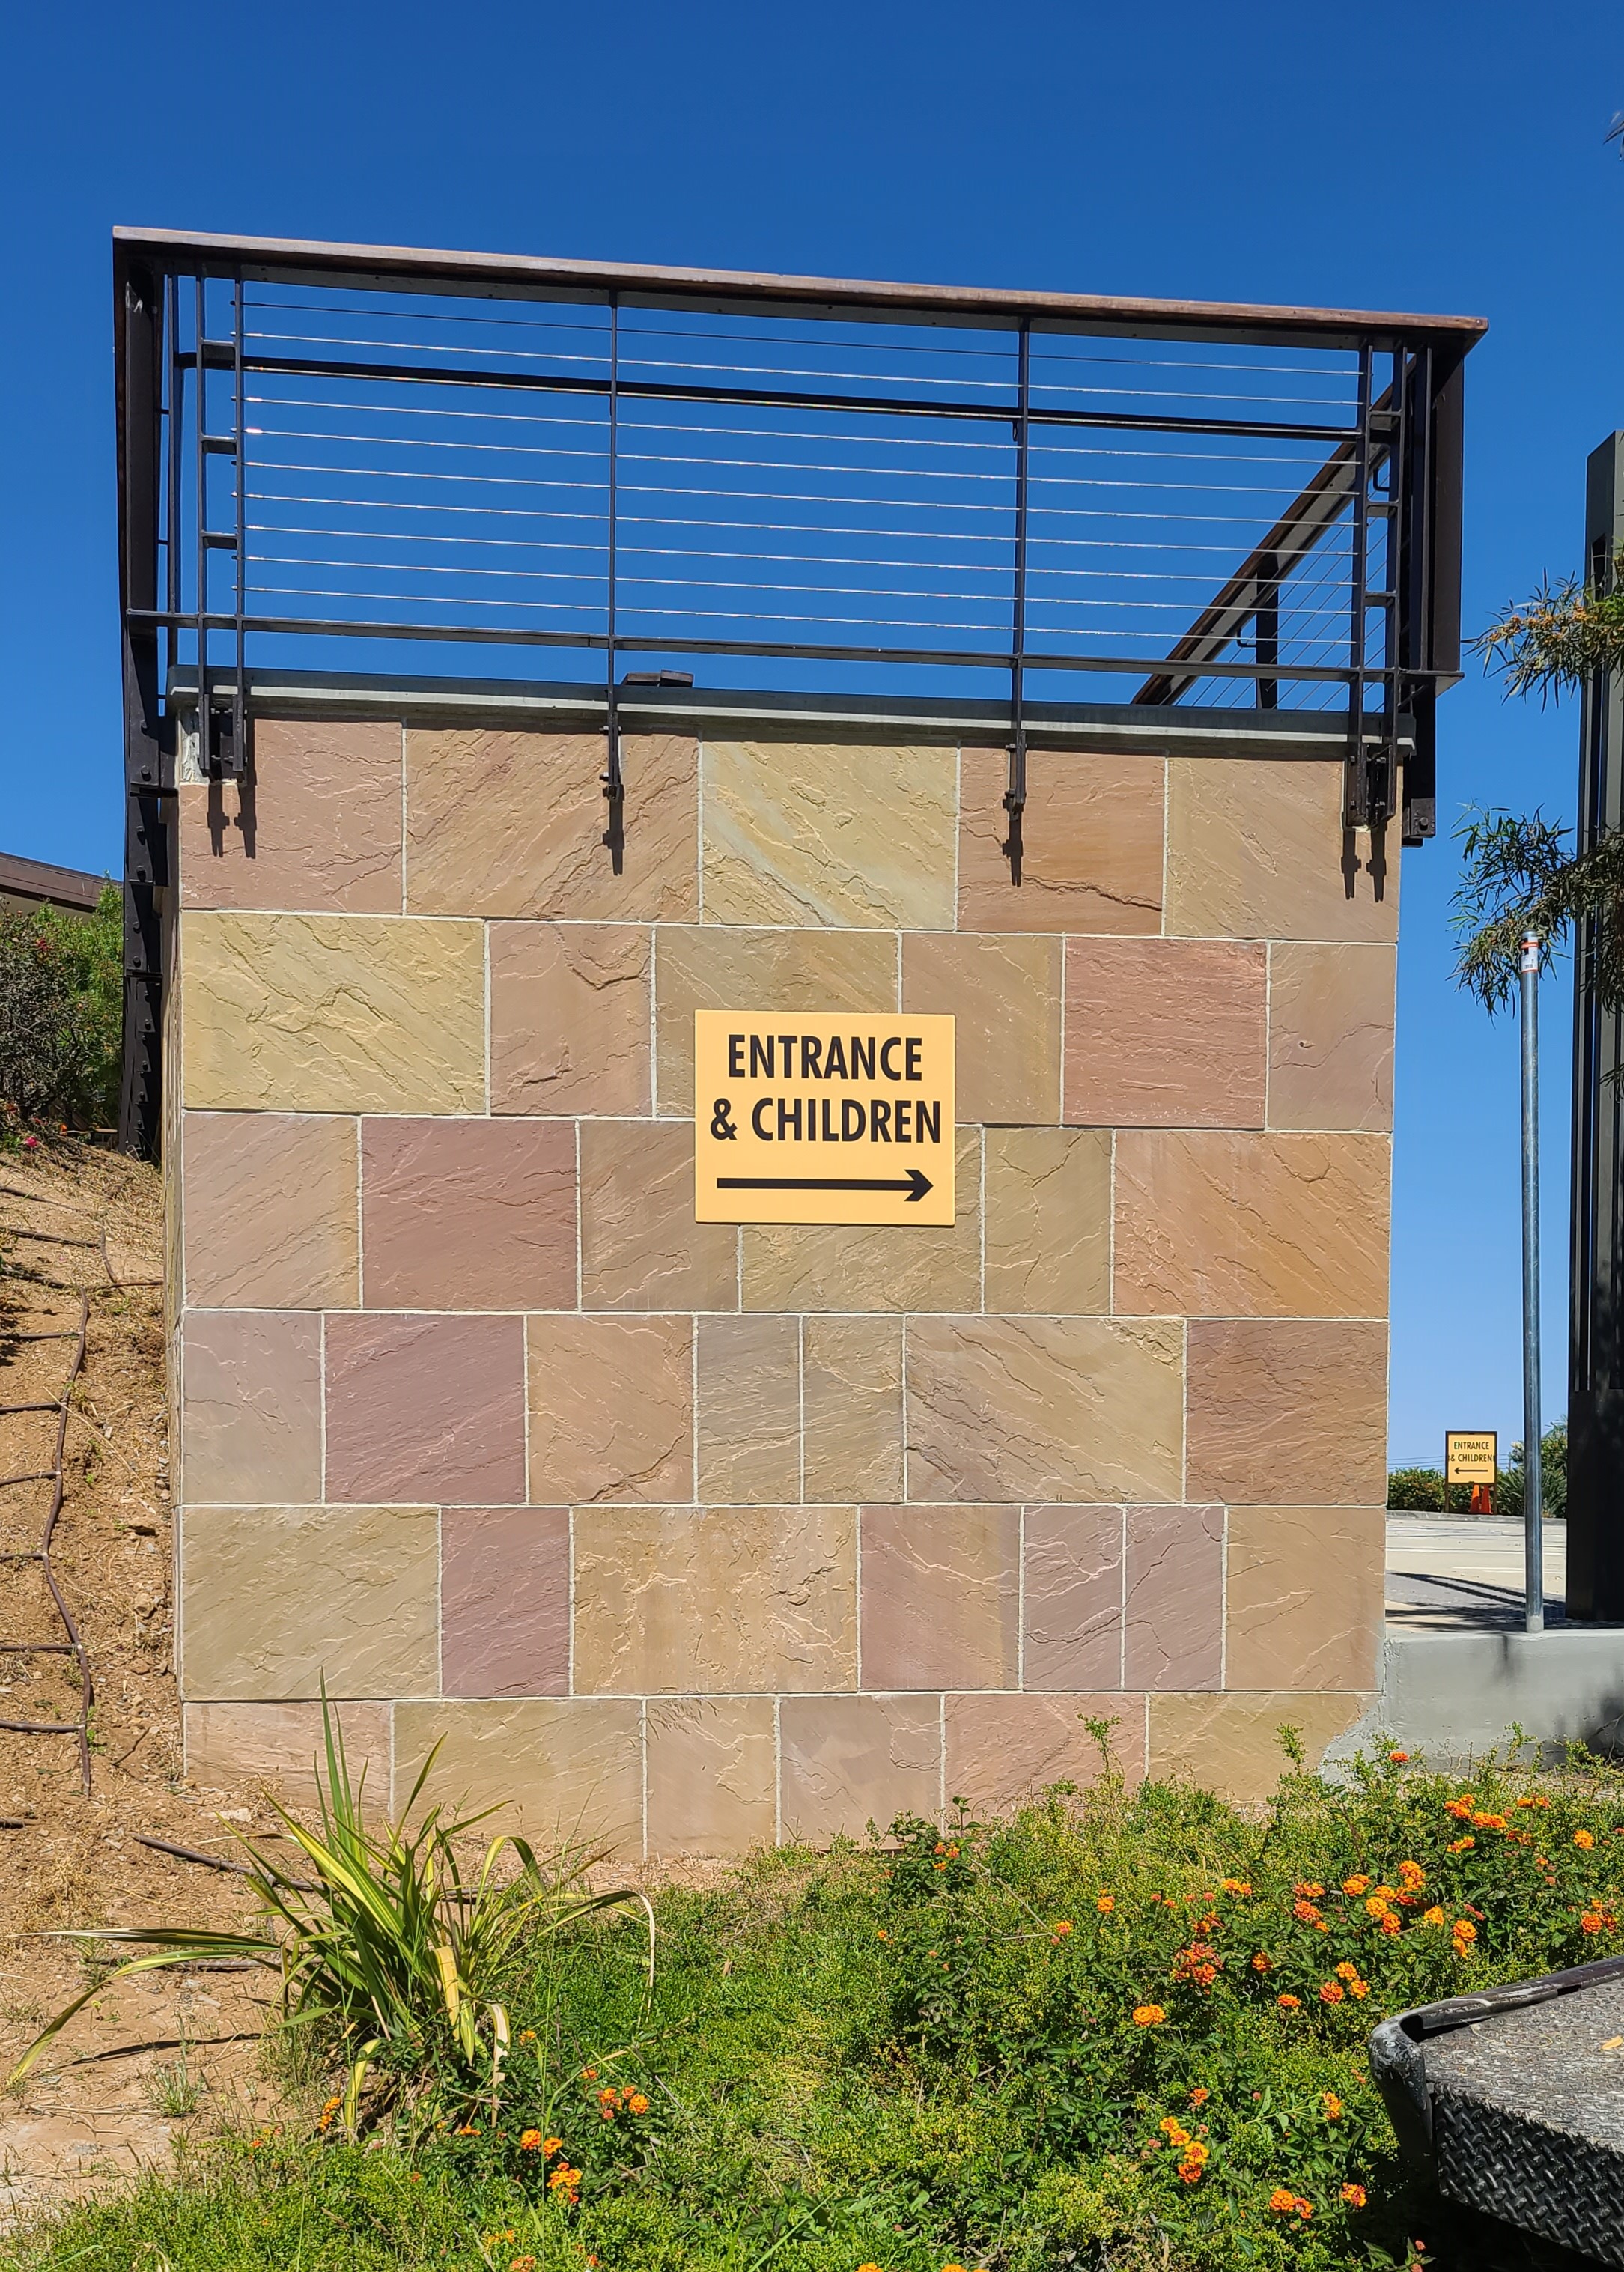 More from our sign package for Malibu Pacific Church, these outdoor directional signage direct parking lot traffic.